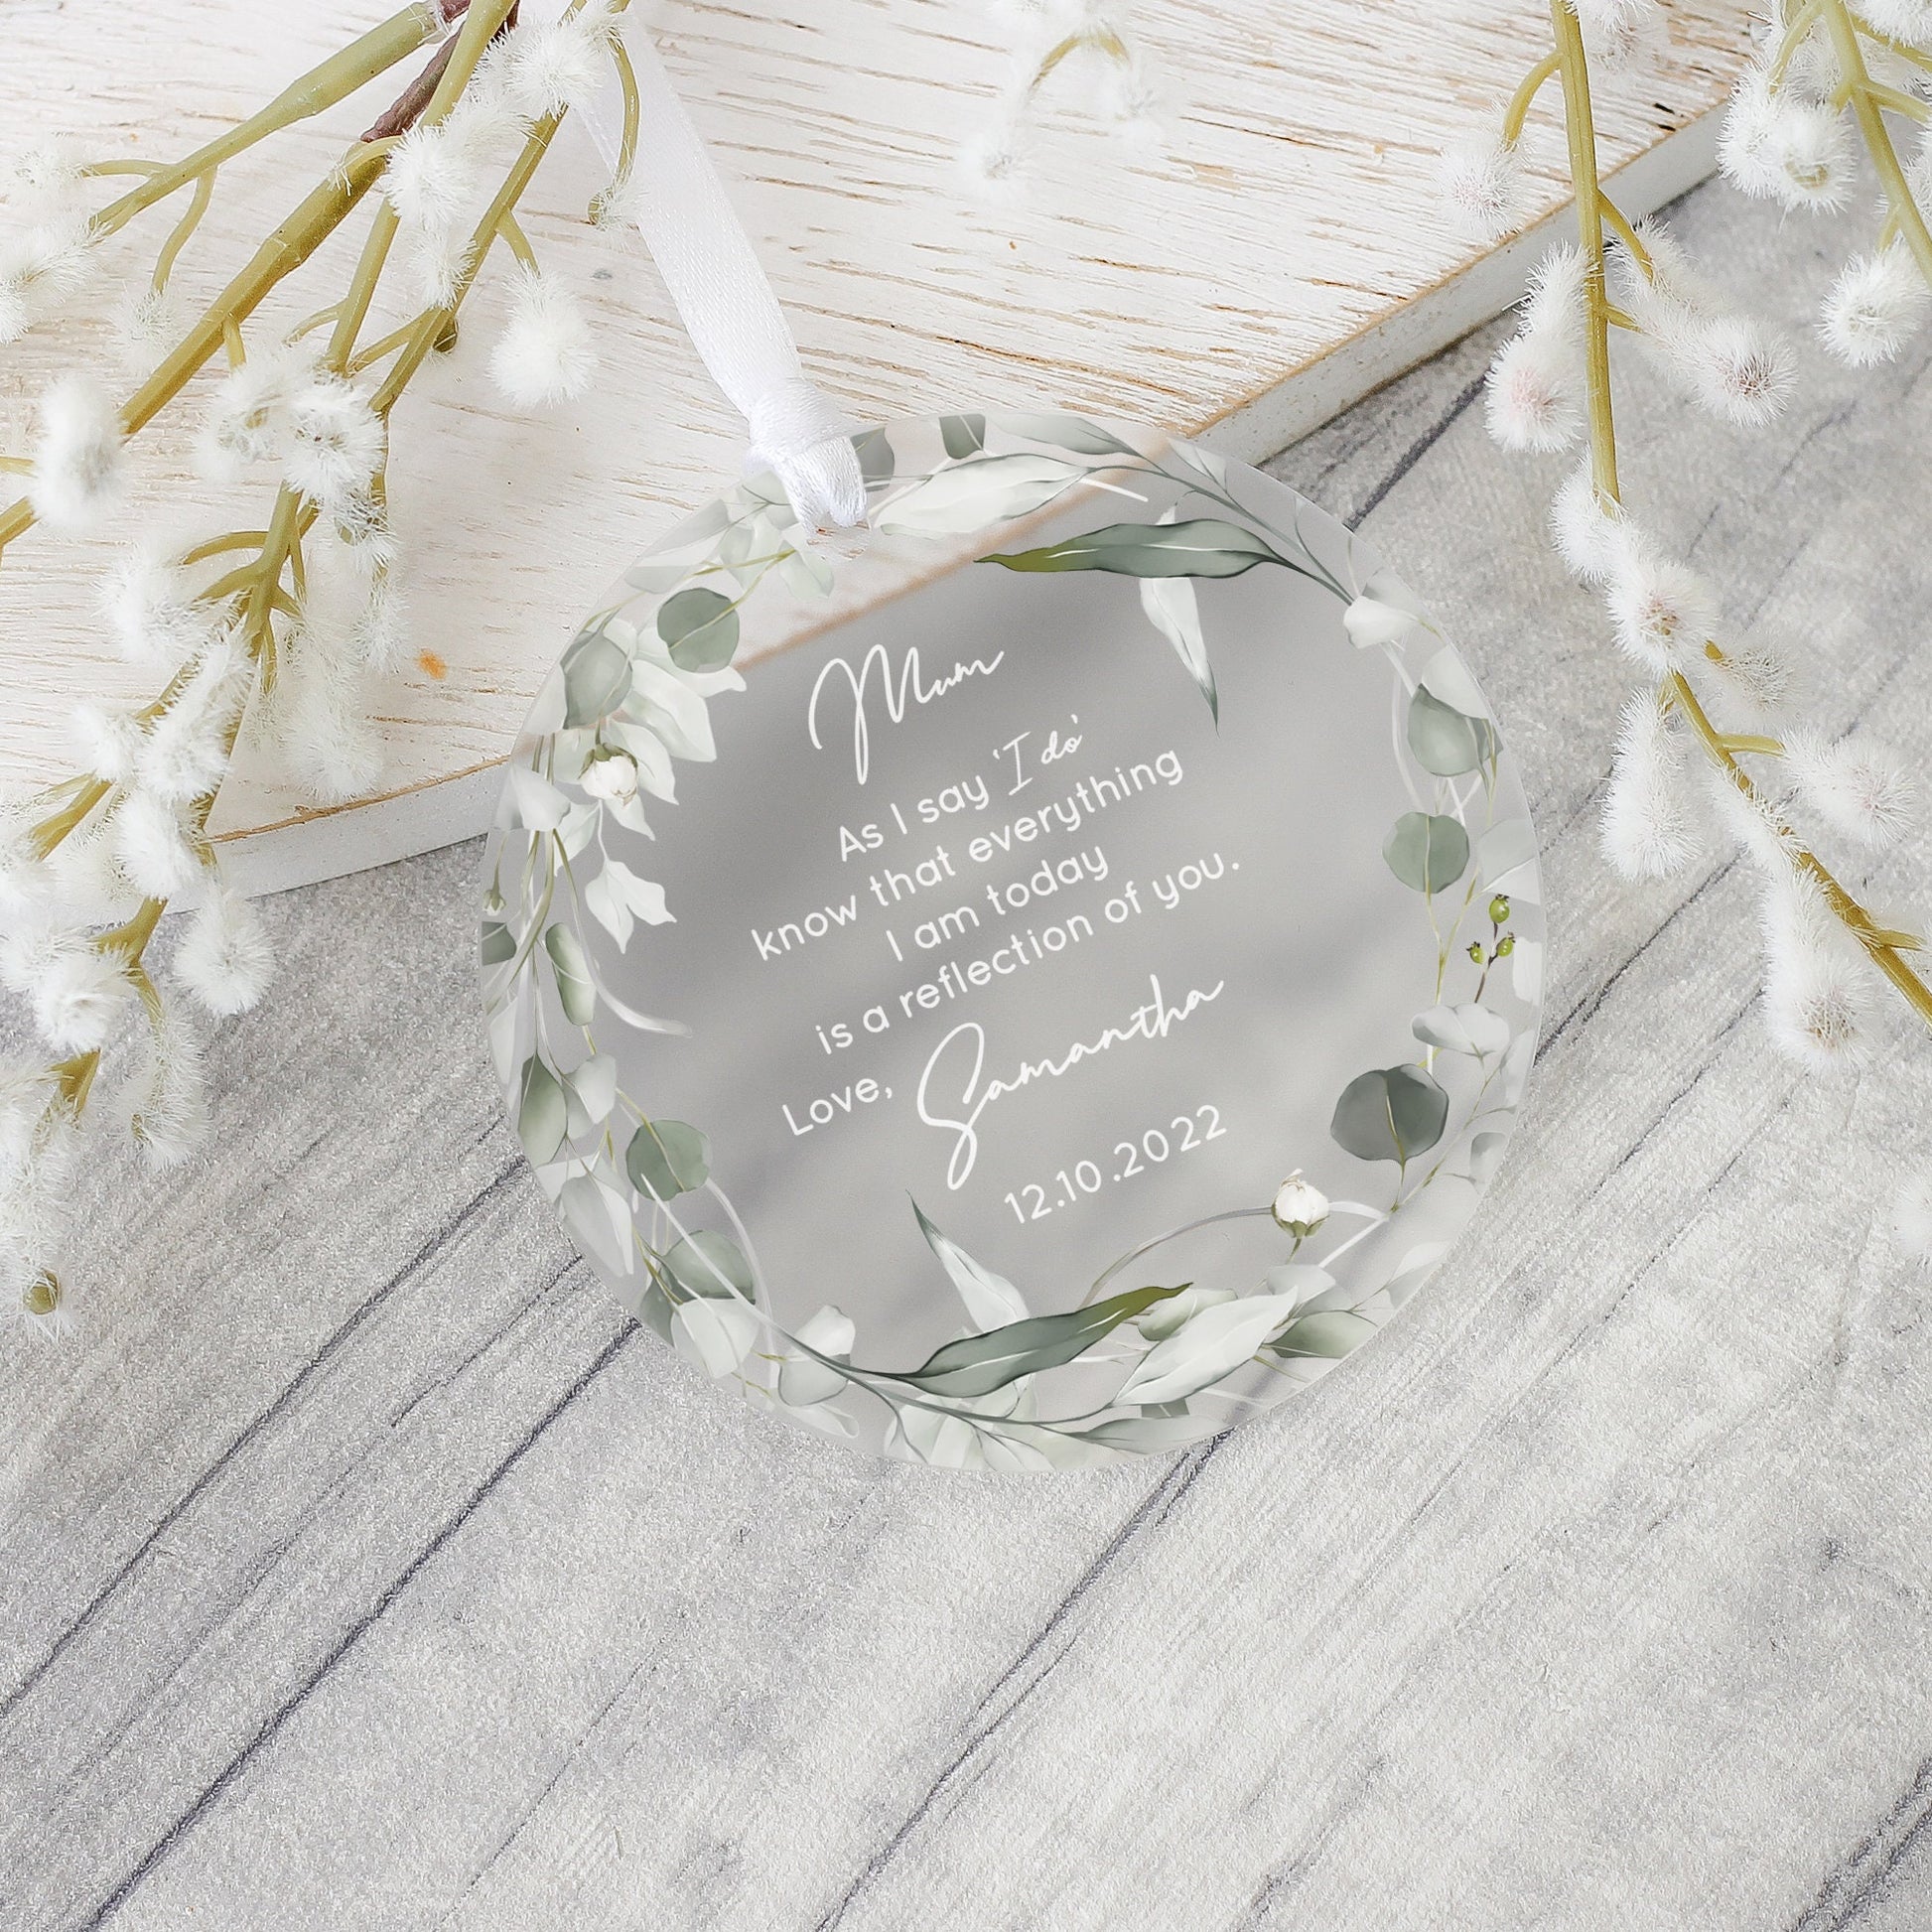 Mother of the Bride Gift, Frosted Acrylic, Mum of Bride Gift, Gifts from Bride, Wedding Day Gifts, Gifts from Bride, Special Quote Mum Gift